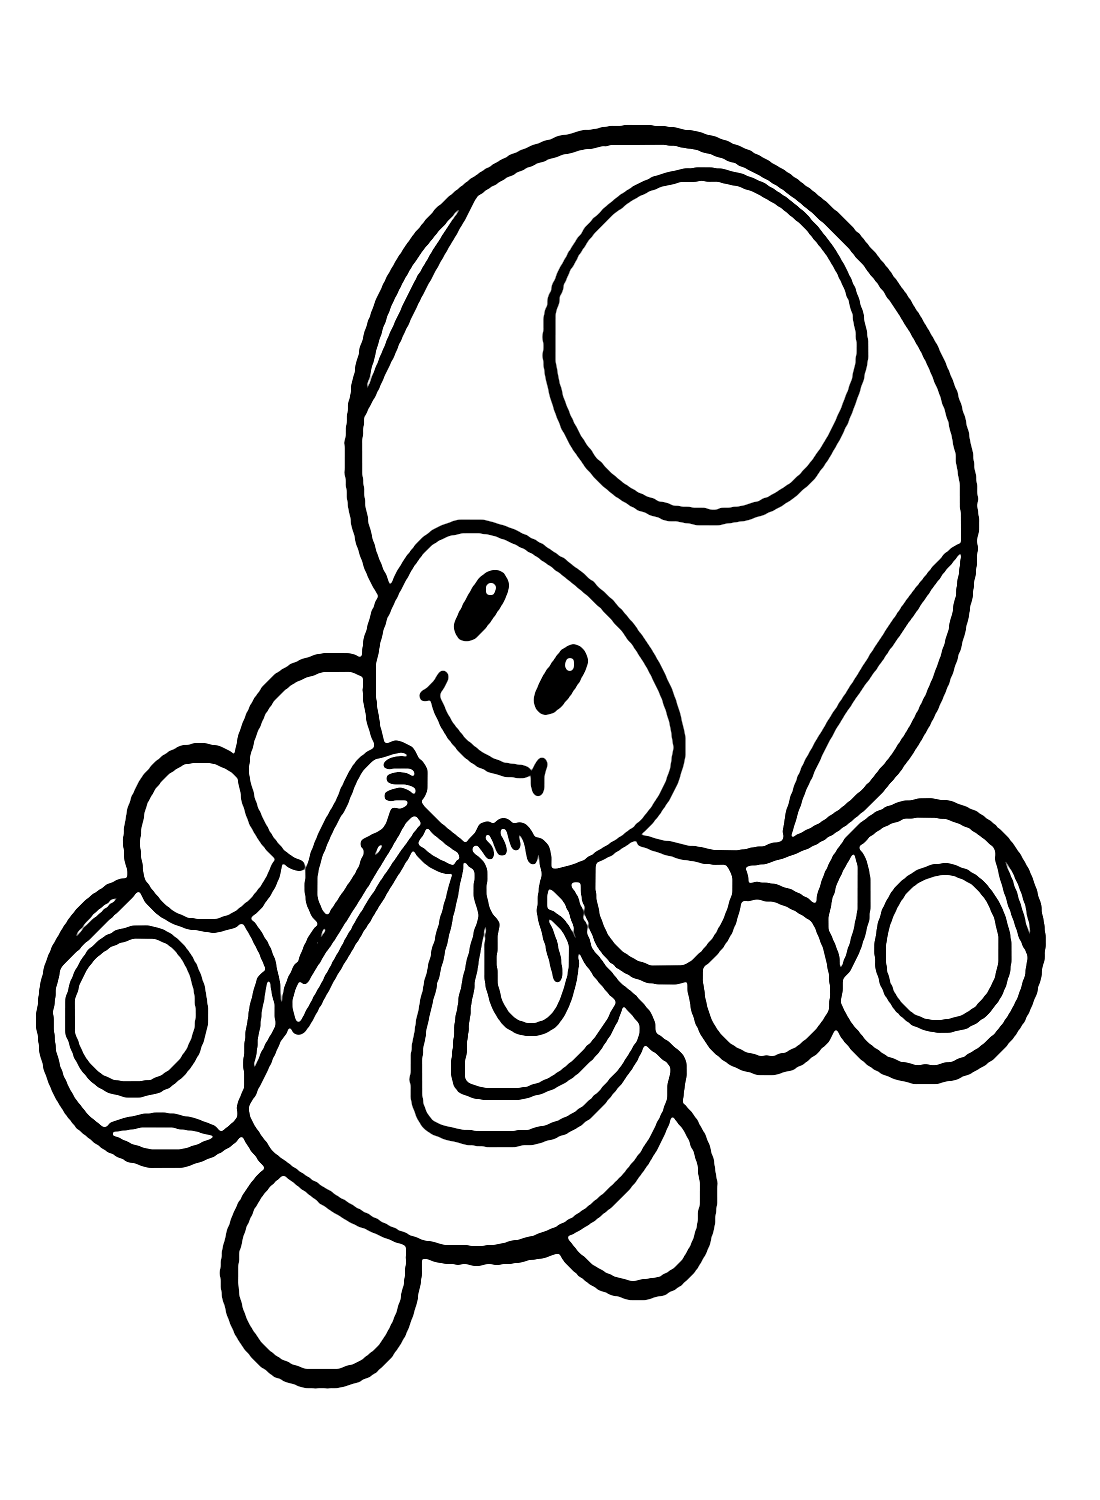 Cute Toadette Coloring Page